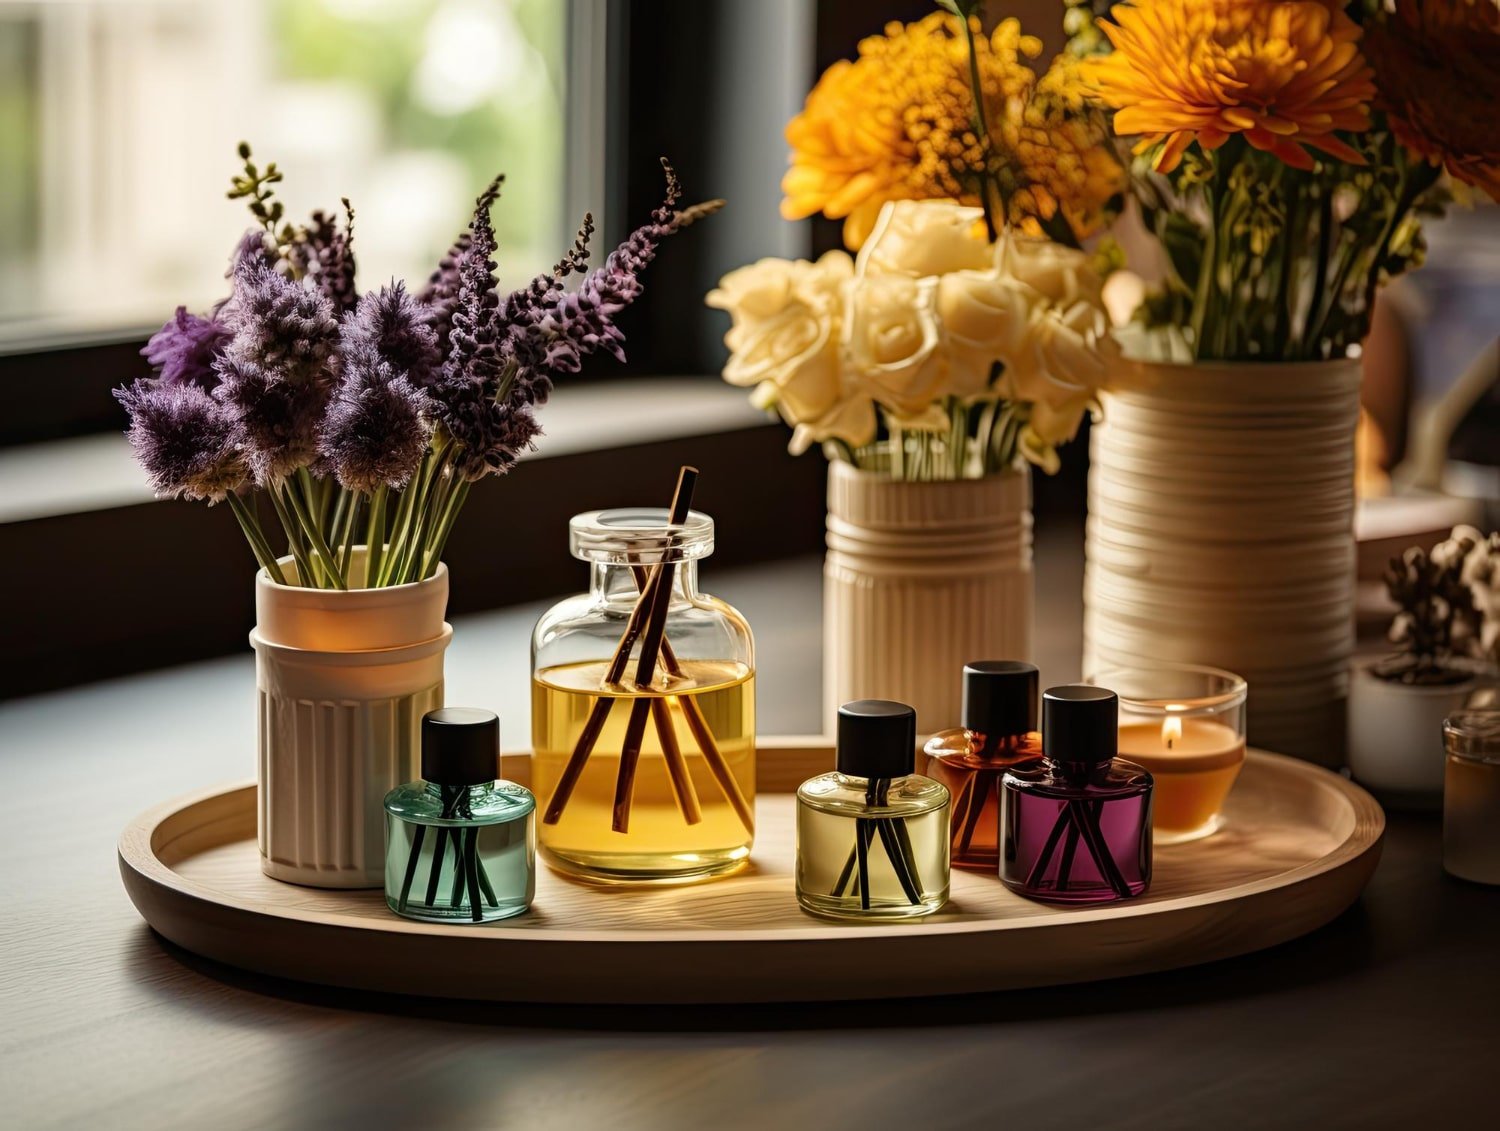 Newell Brands Home Fragrance Scents for Every Home